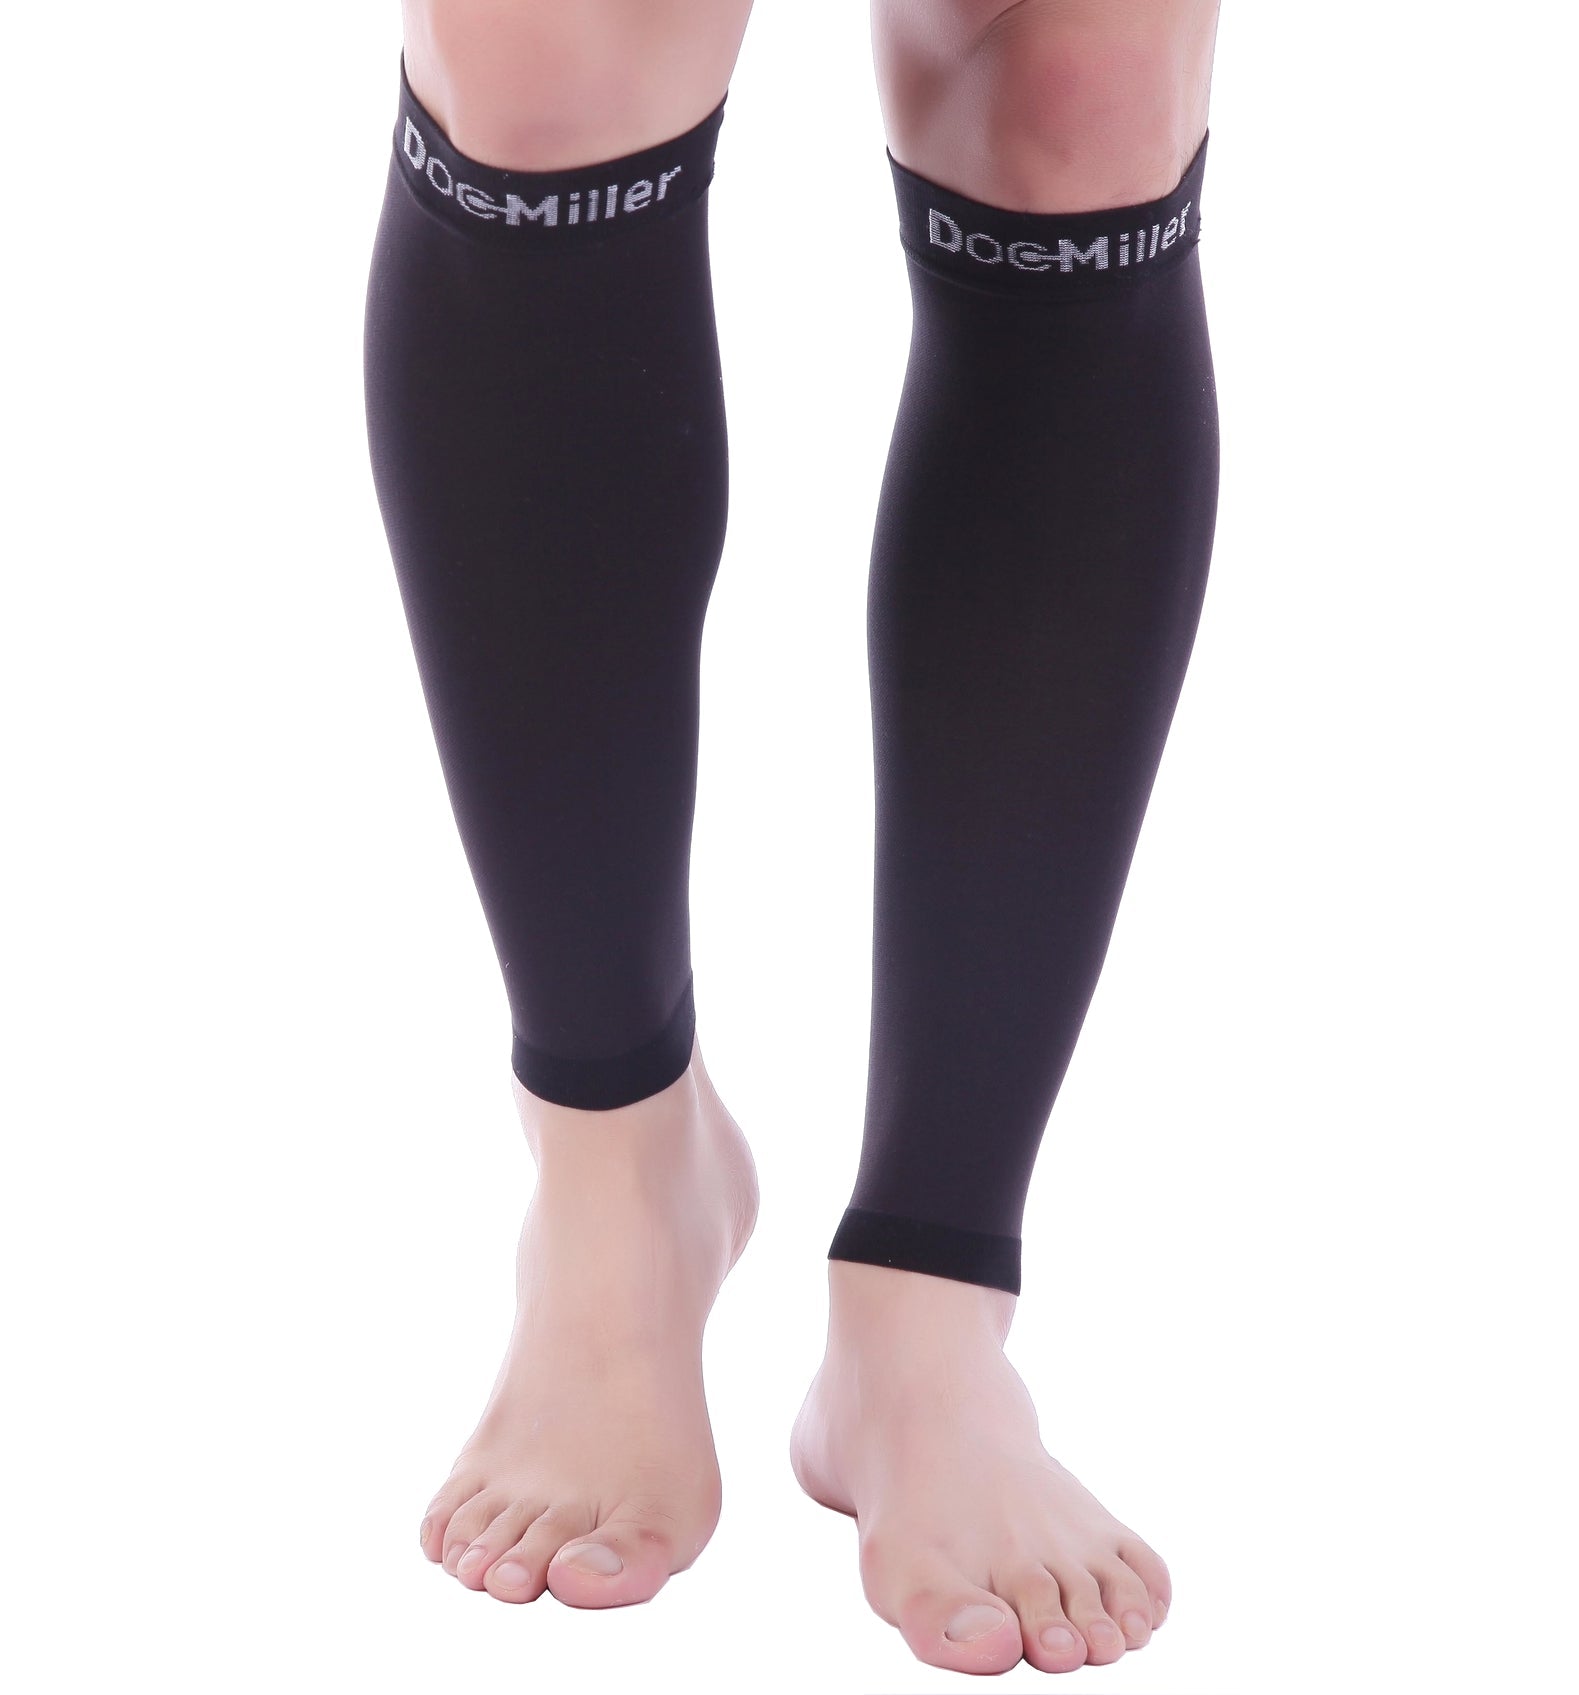 PETITE Calf Compression Sleeve 15-20 mmHg BLACK by Doc Miller